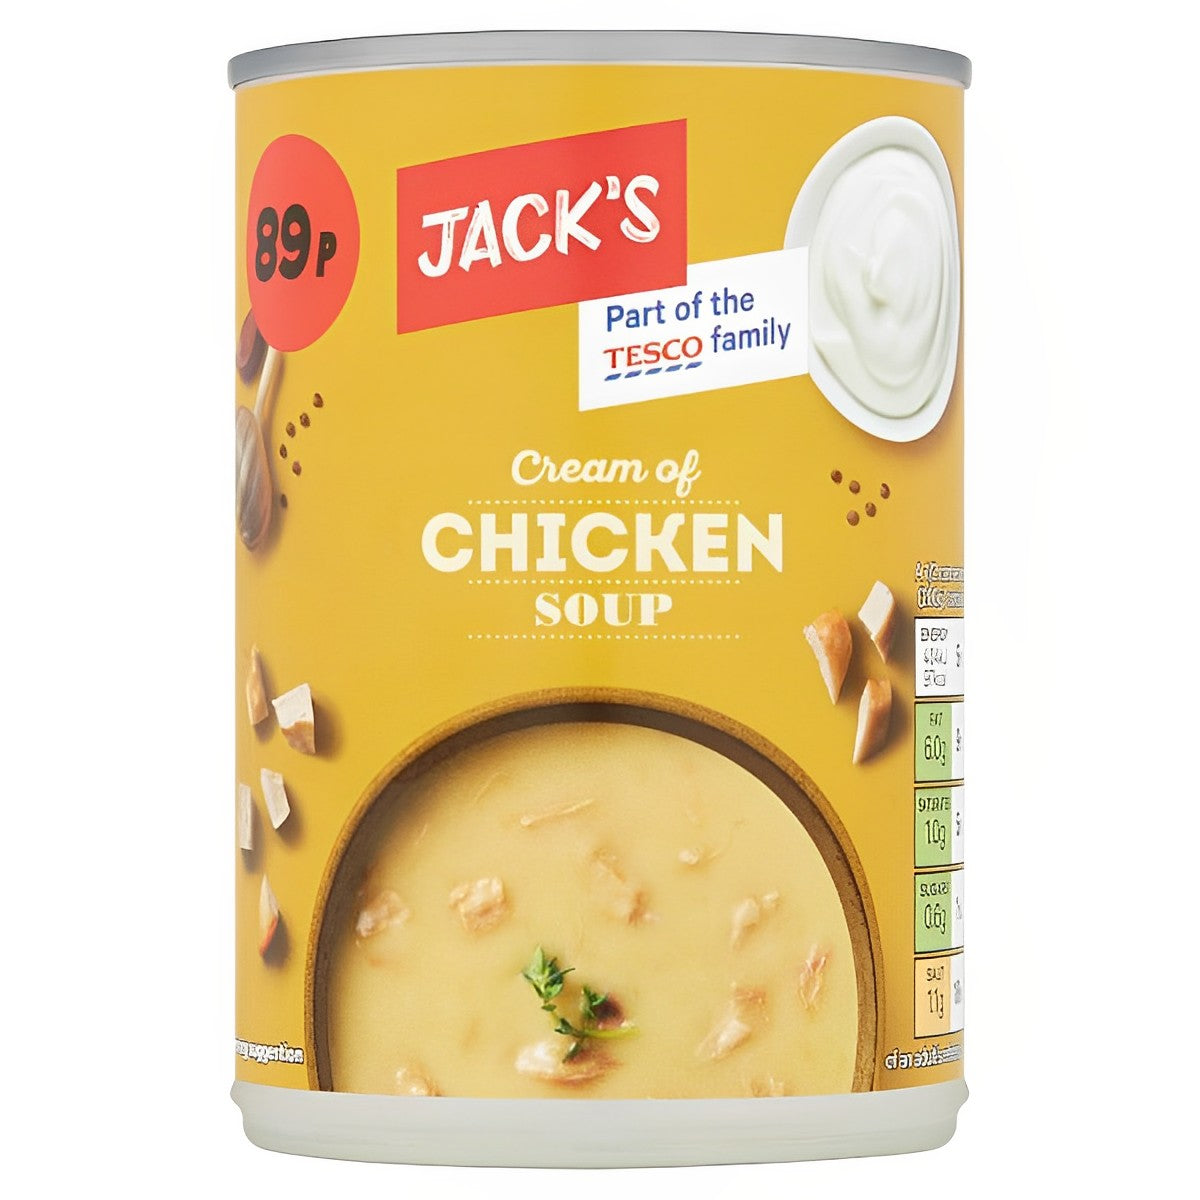 Jack's - Cream of Chicken Soup - 400g - Continental Food Store